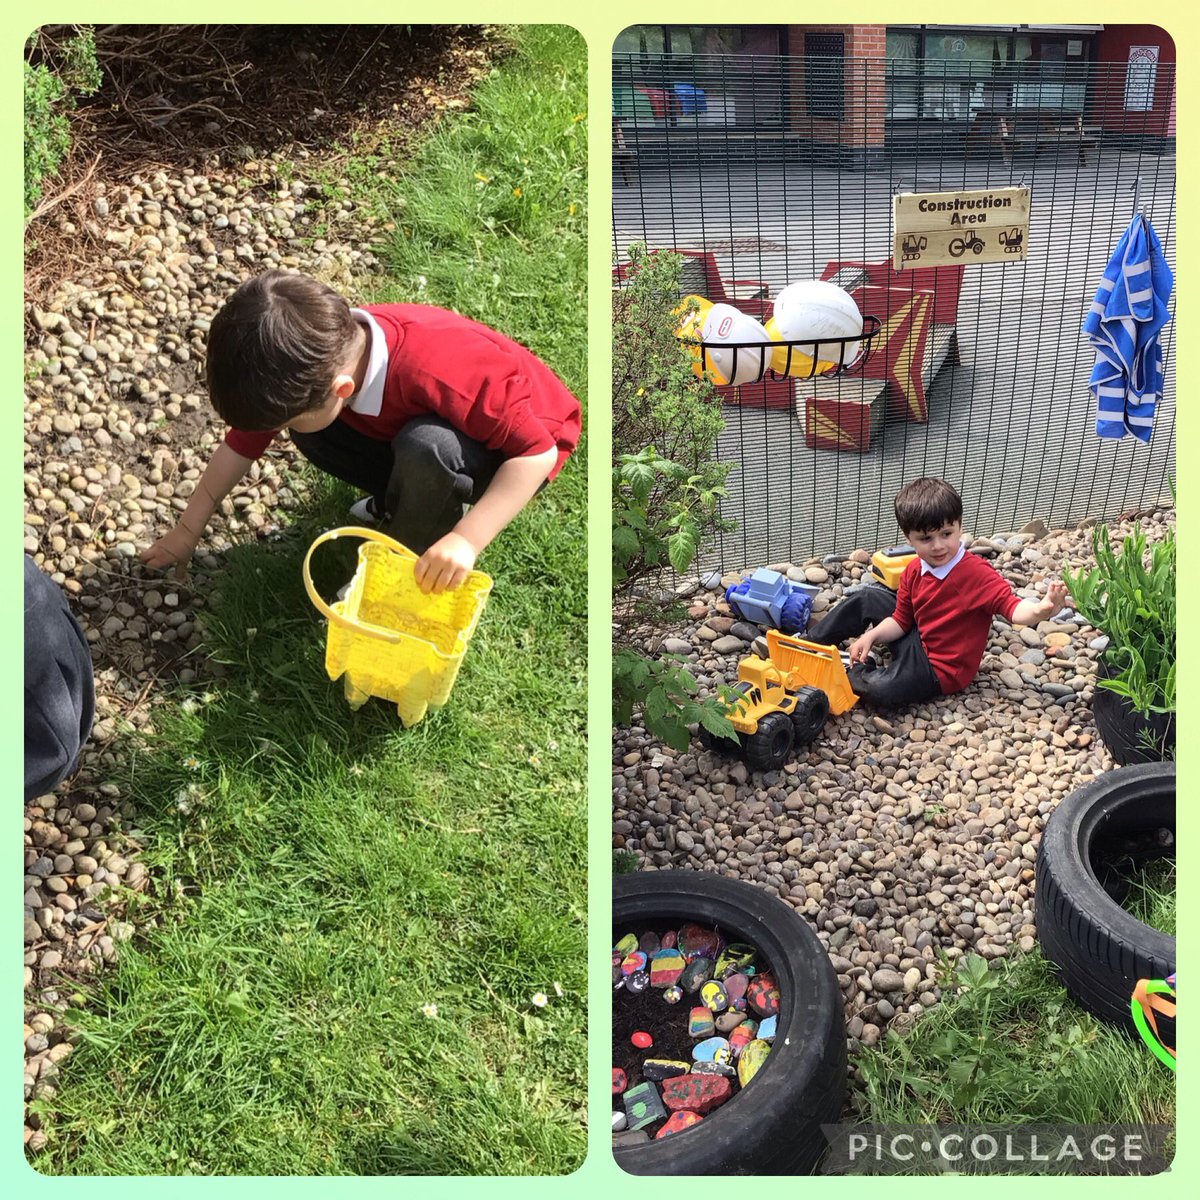 This little one enjoyed transporting the pebbles from our garden to replenish the pebbles in our construction area. Keep up the hard work young man! 😊 @eyfsMrsWest